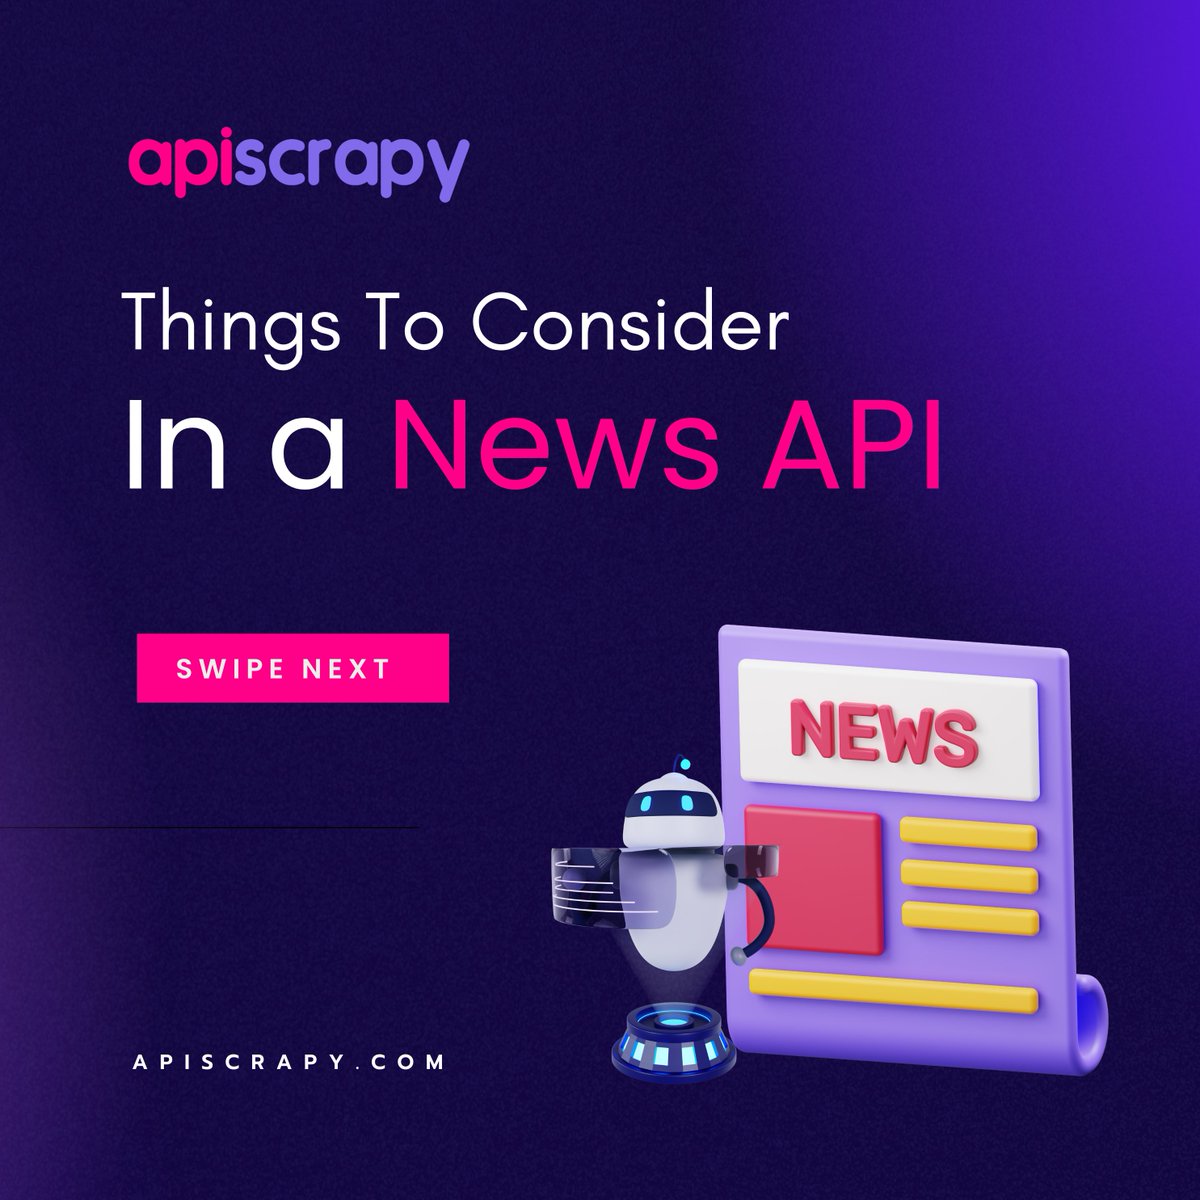 Things To Consider In a News API

Check out ApiScrapy's News APIs by clicking the link below.

#apidevelopment #artificialintelligence #news #dataanalytics #datscience #socialmedia #outsourcing #content #api